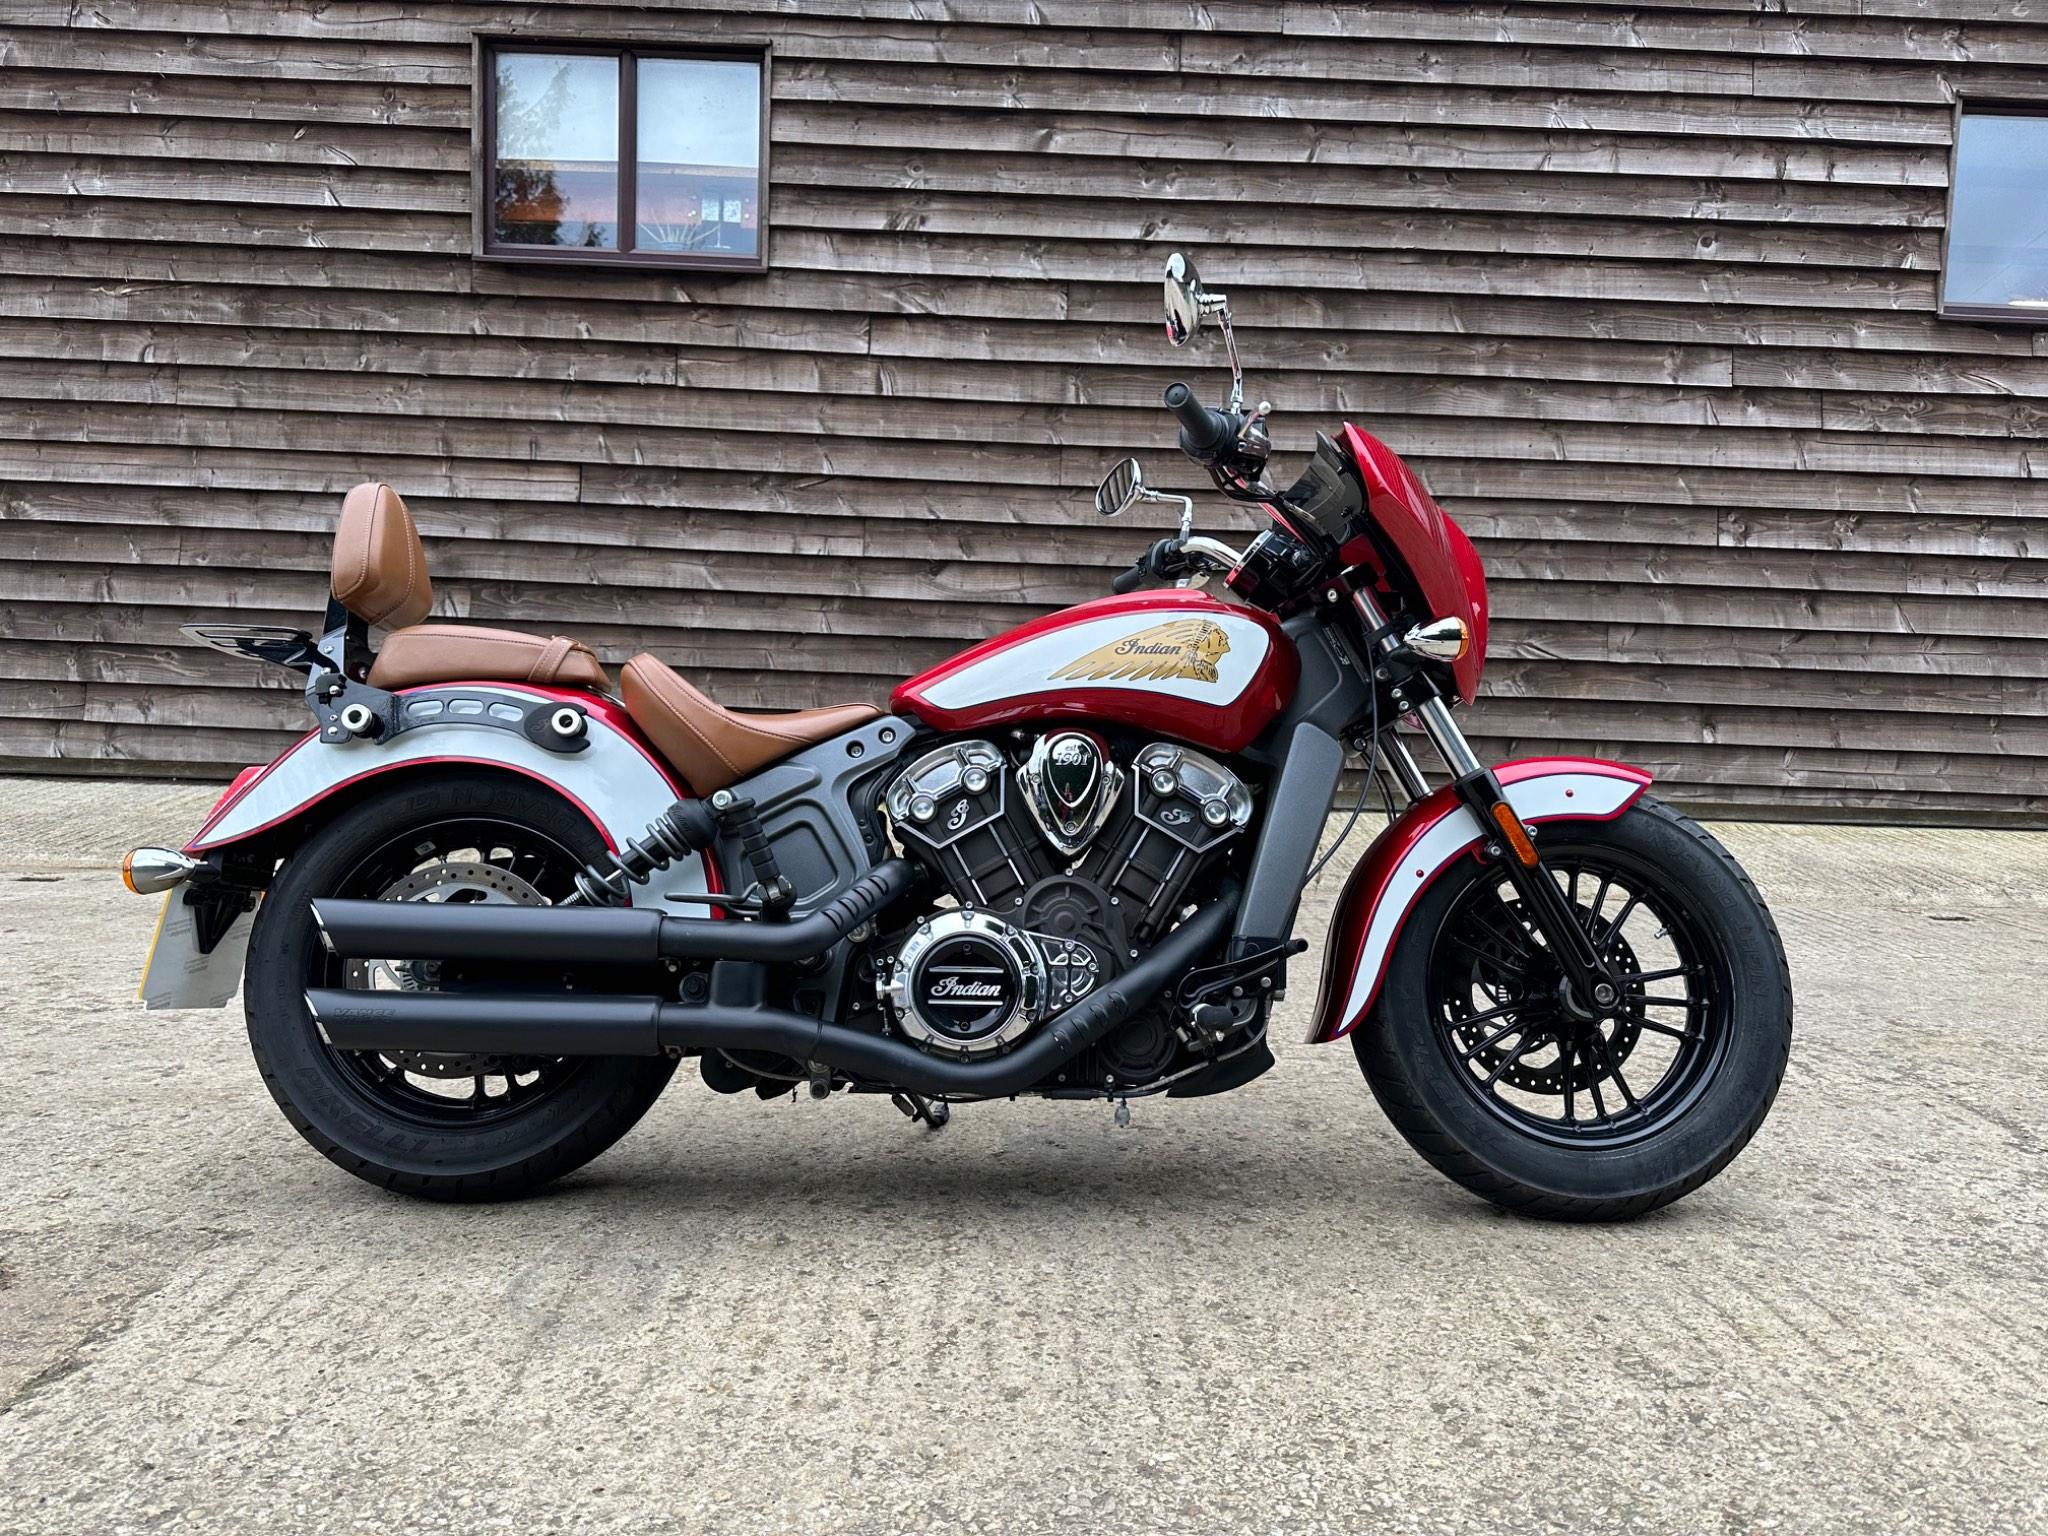 2020 Indian Scout 1133 Scout (Indian Motorcycle Red/Ivory Cream) From £188.18 per month 